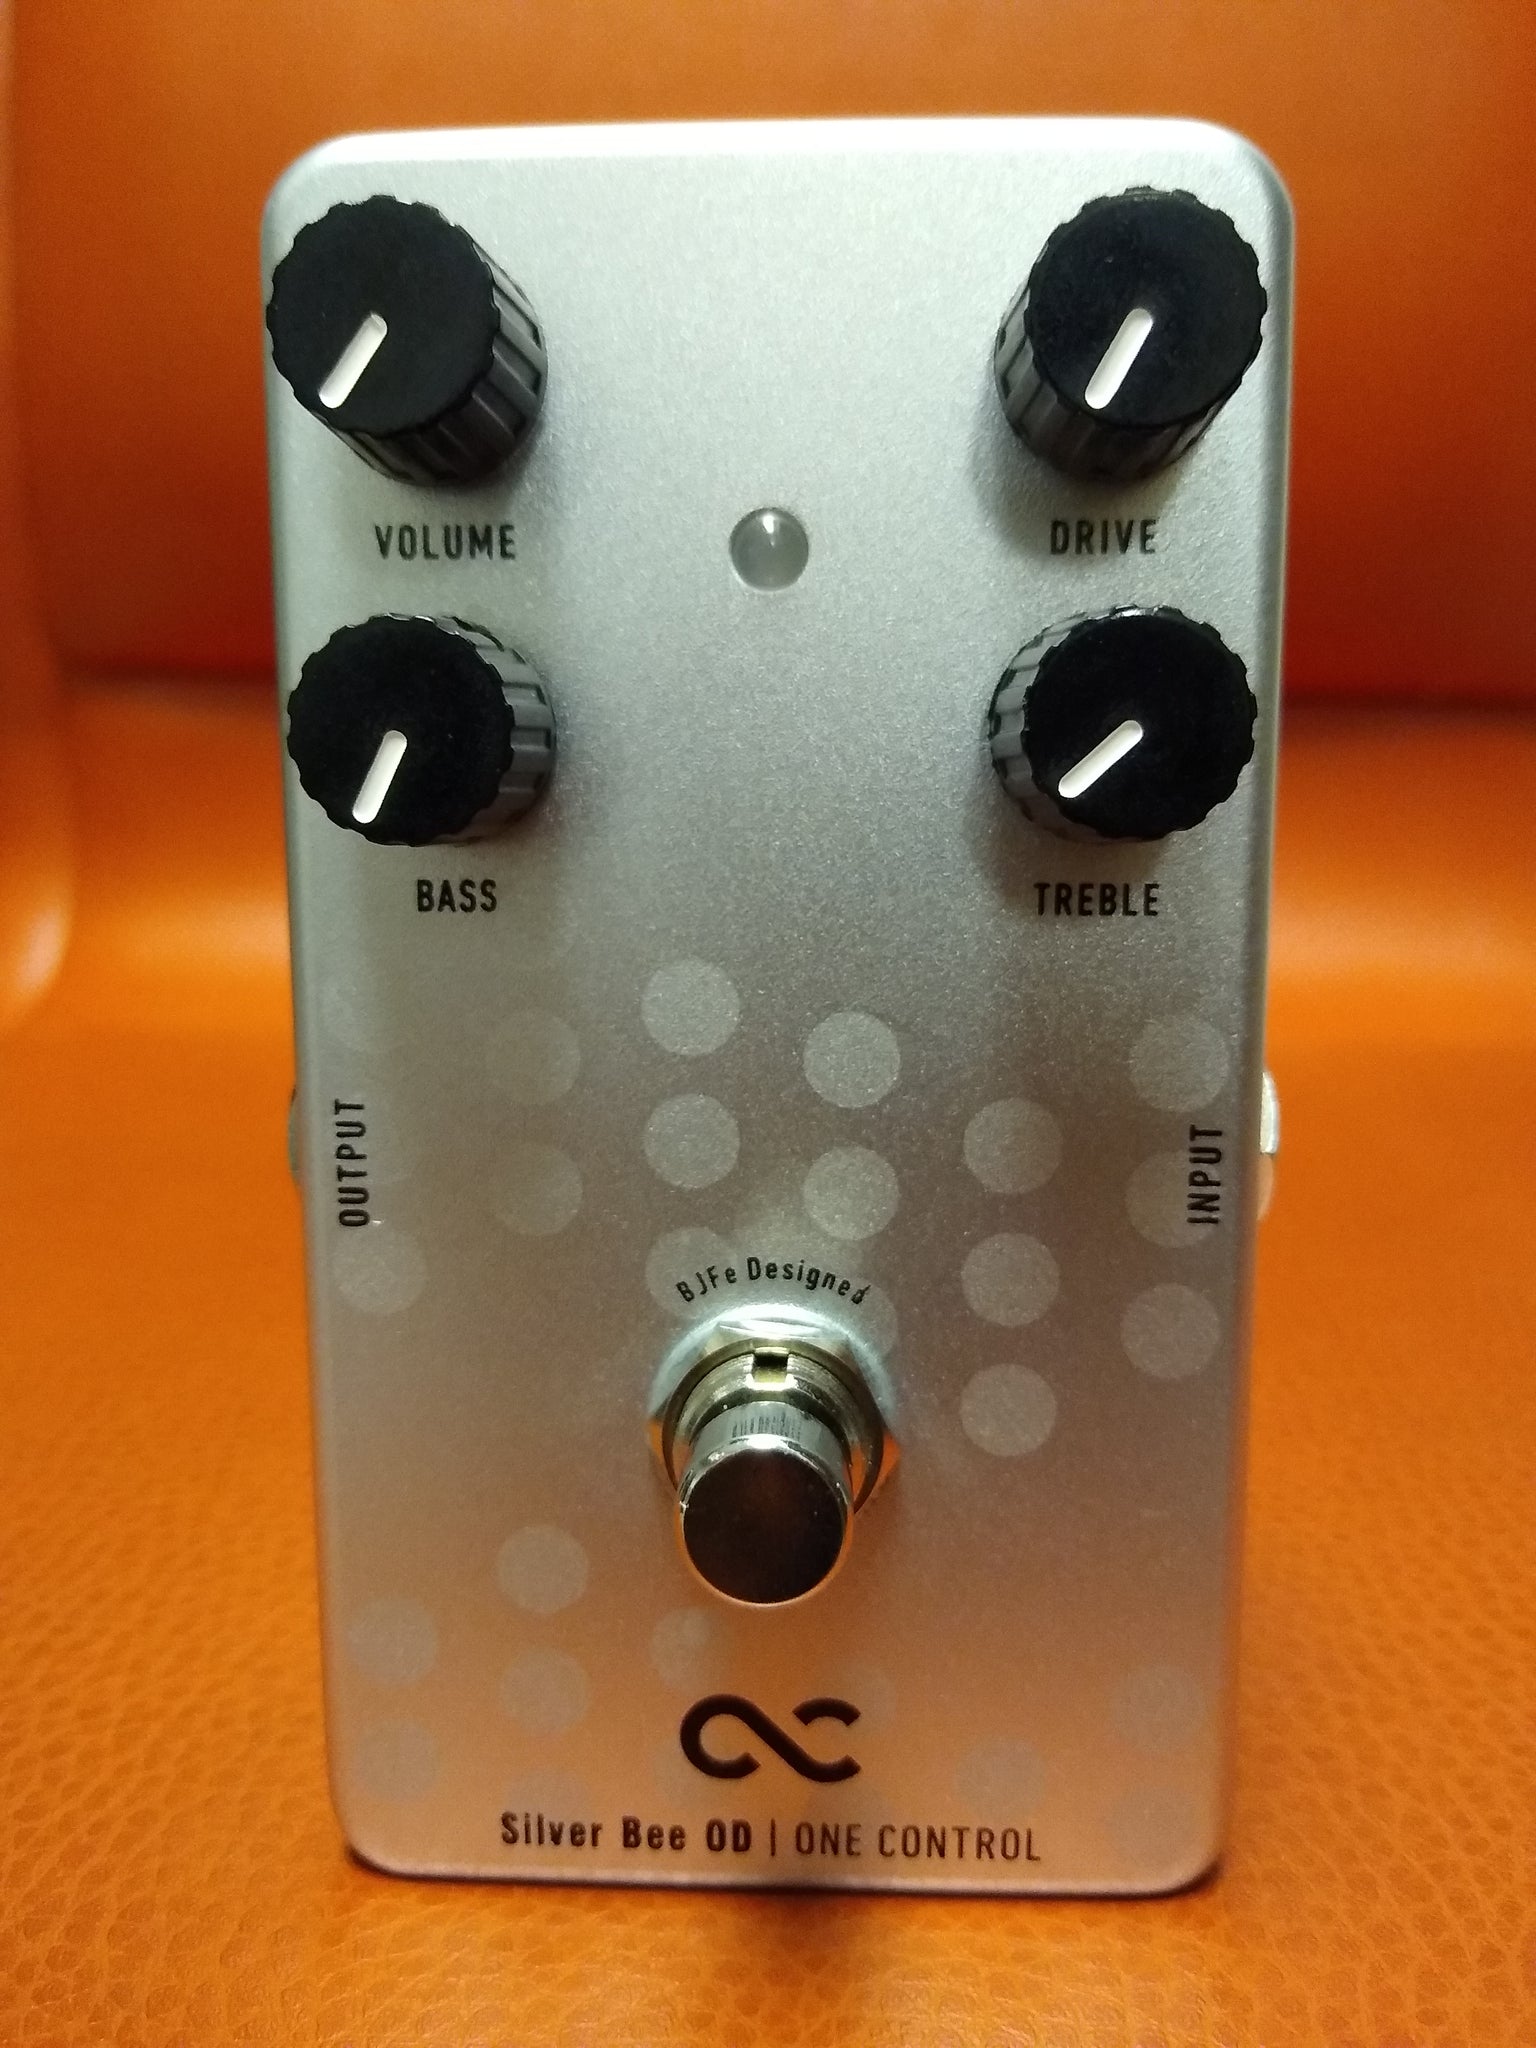 One Control Silver Bee Overdrive used